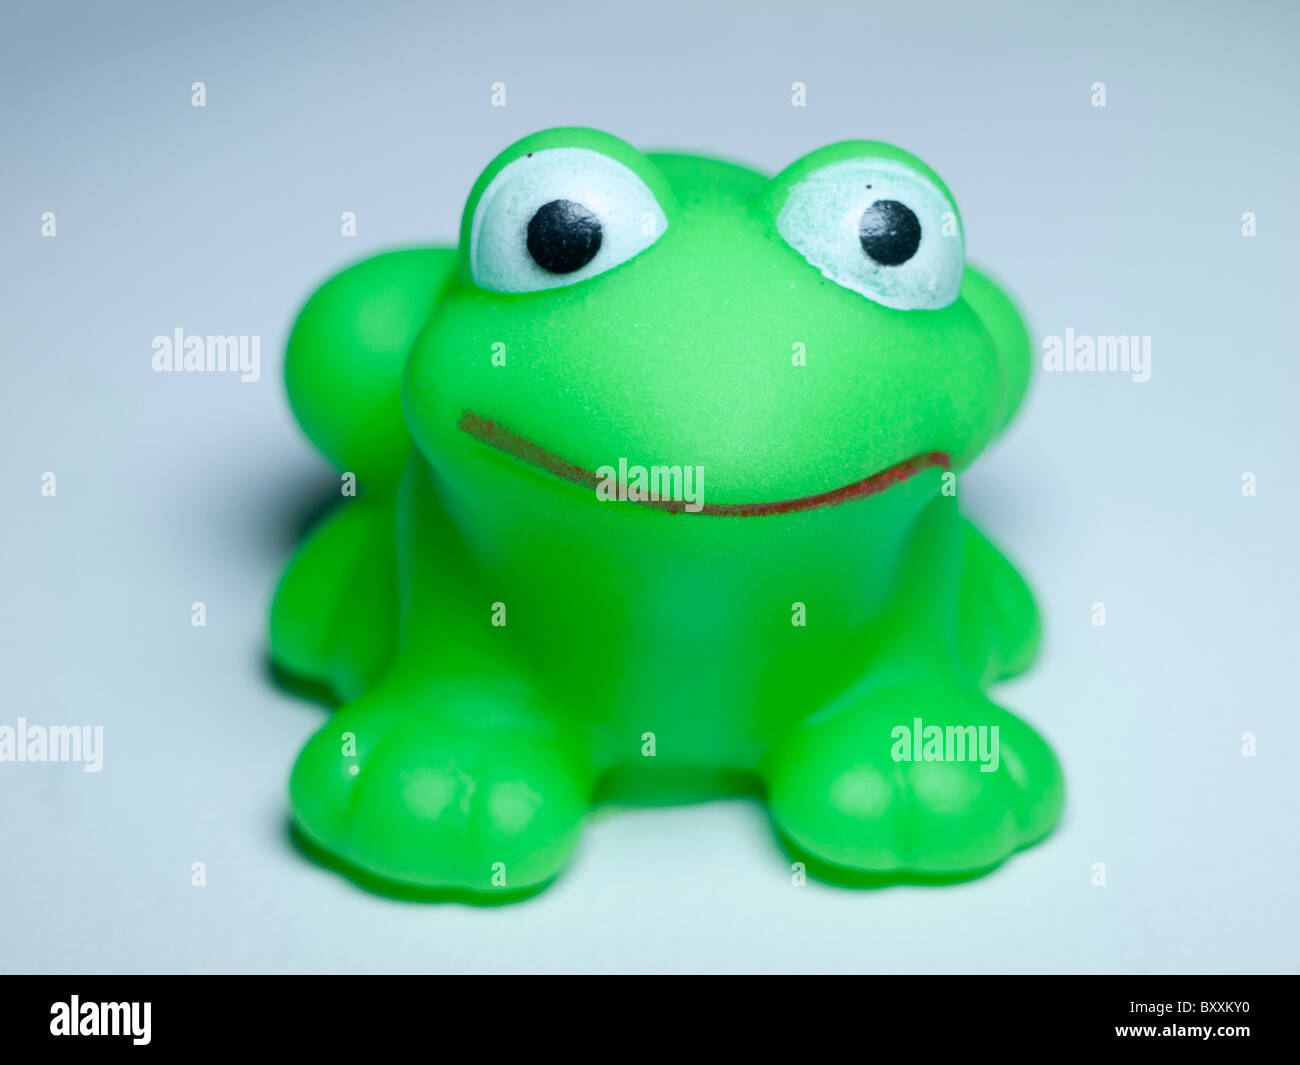 Toxic rubber toy made from PVC which contains some chemical. Stock Photo